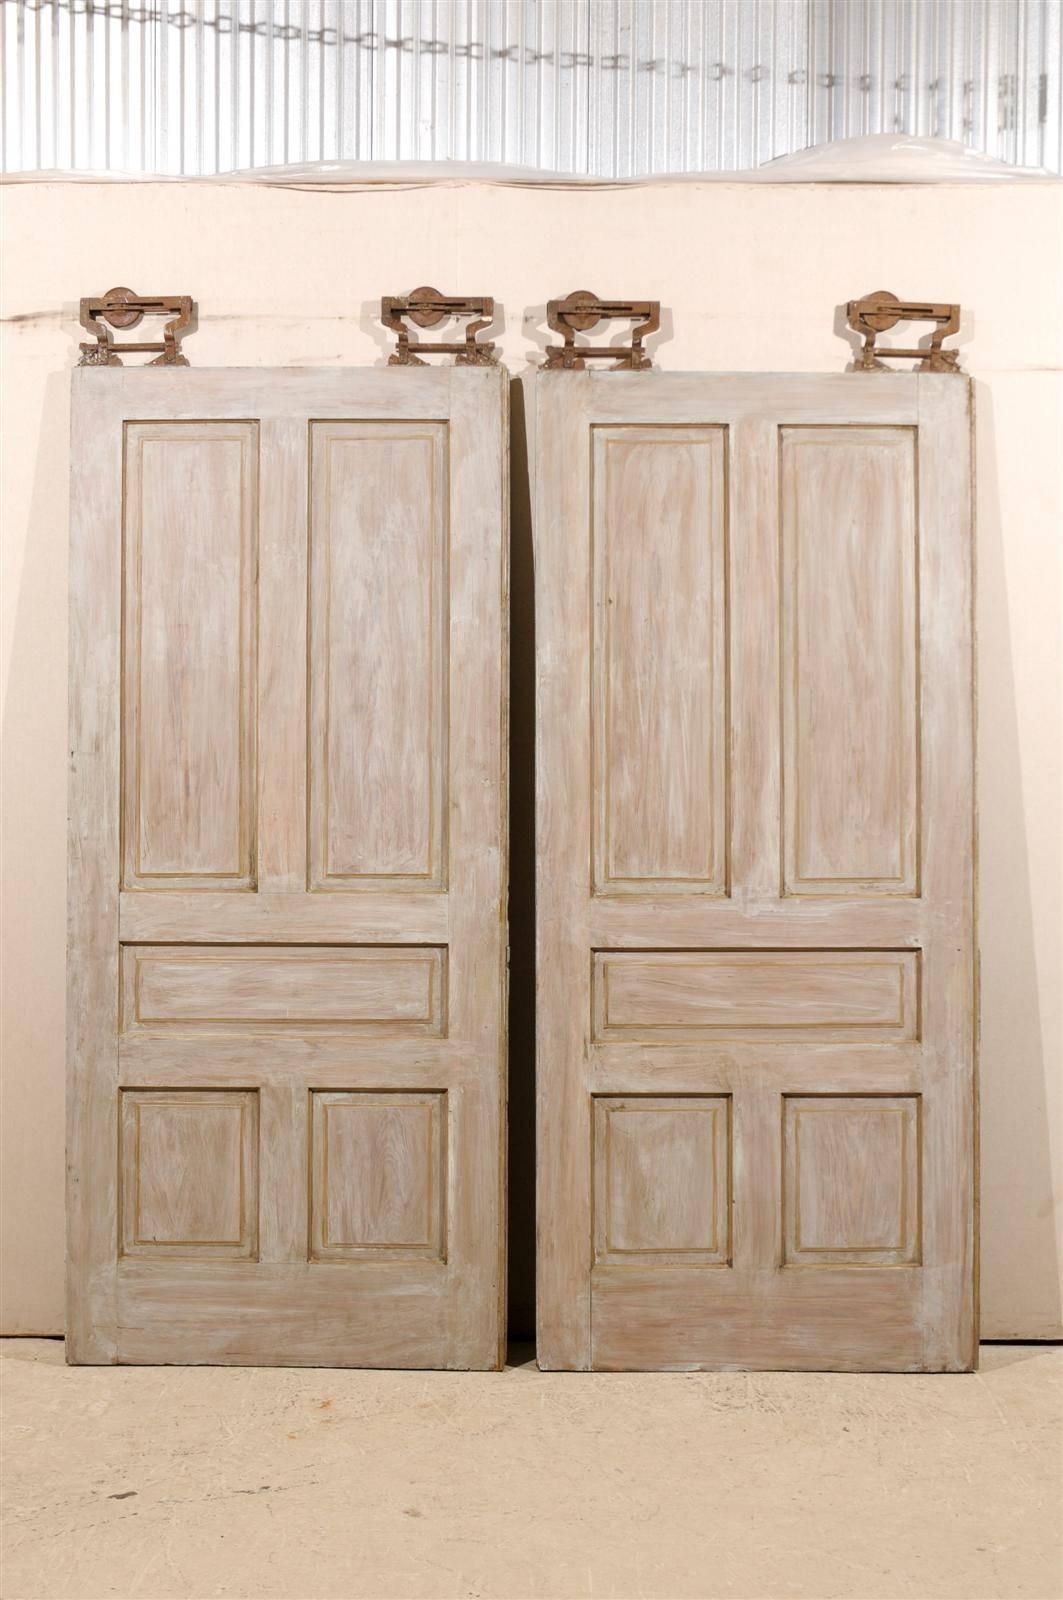 A pair of early 20th century American pocket doors with their original hanging hardware. This pair of early 20th century painted wood doors features a decor of carved motifs. Perfect space savers, their pastel light grey color would blend nicely